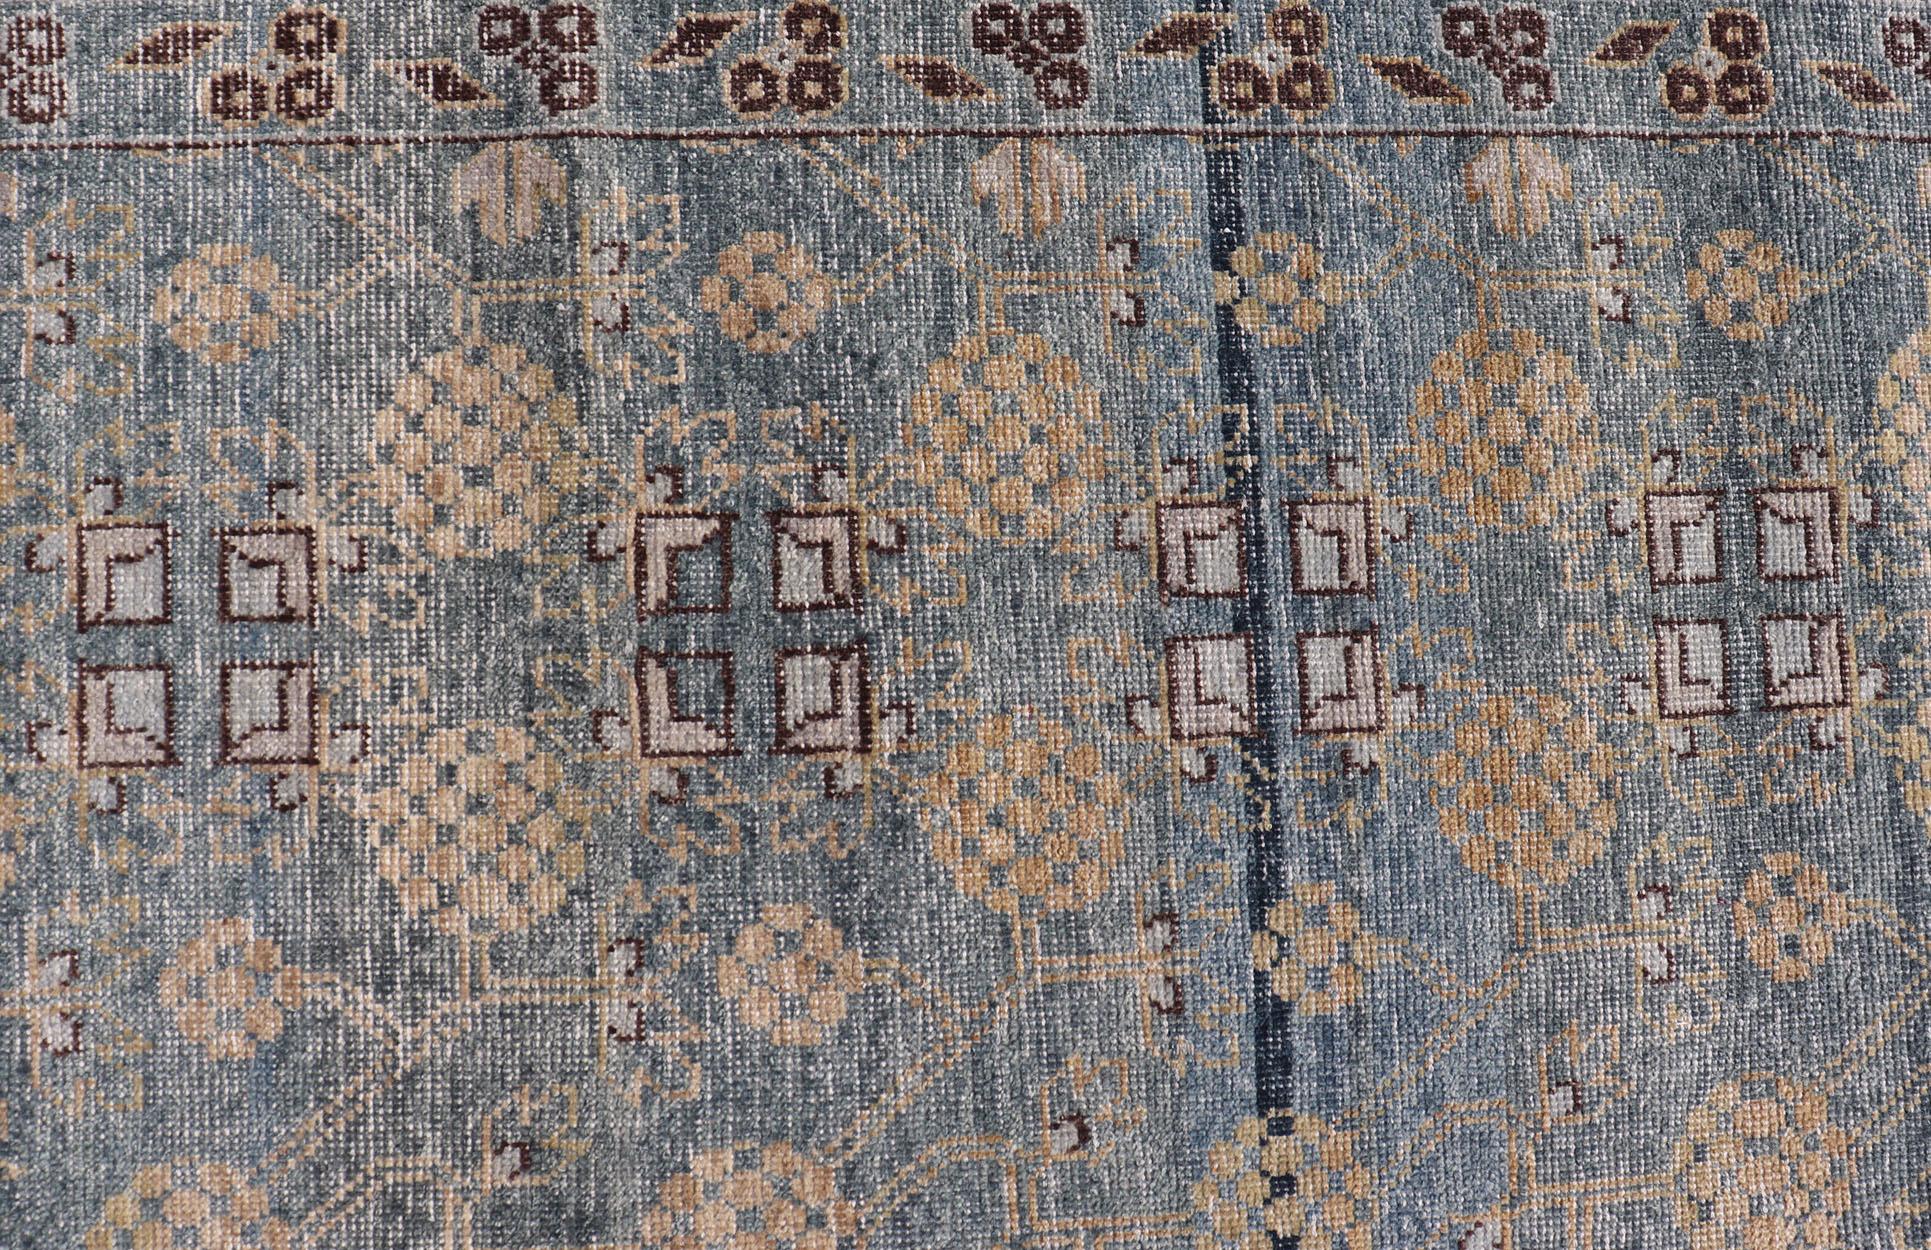 Modern All-Over Tribal Motif Khotan Area Rug in Dark Blues, Brown and Cream In New Condition For Sale In Atlanta, GA